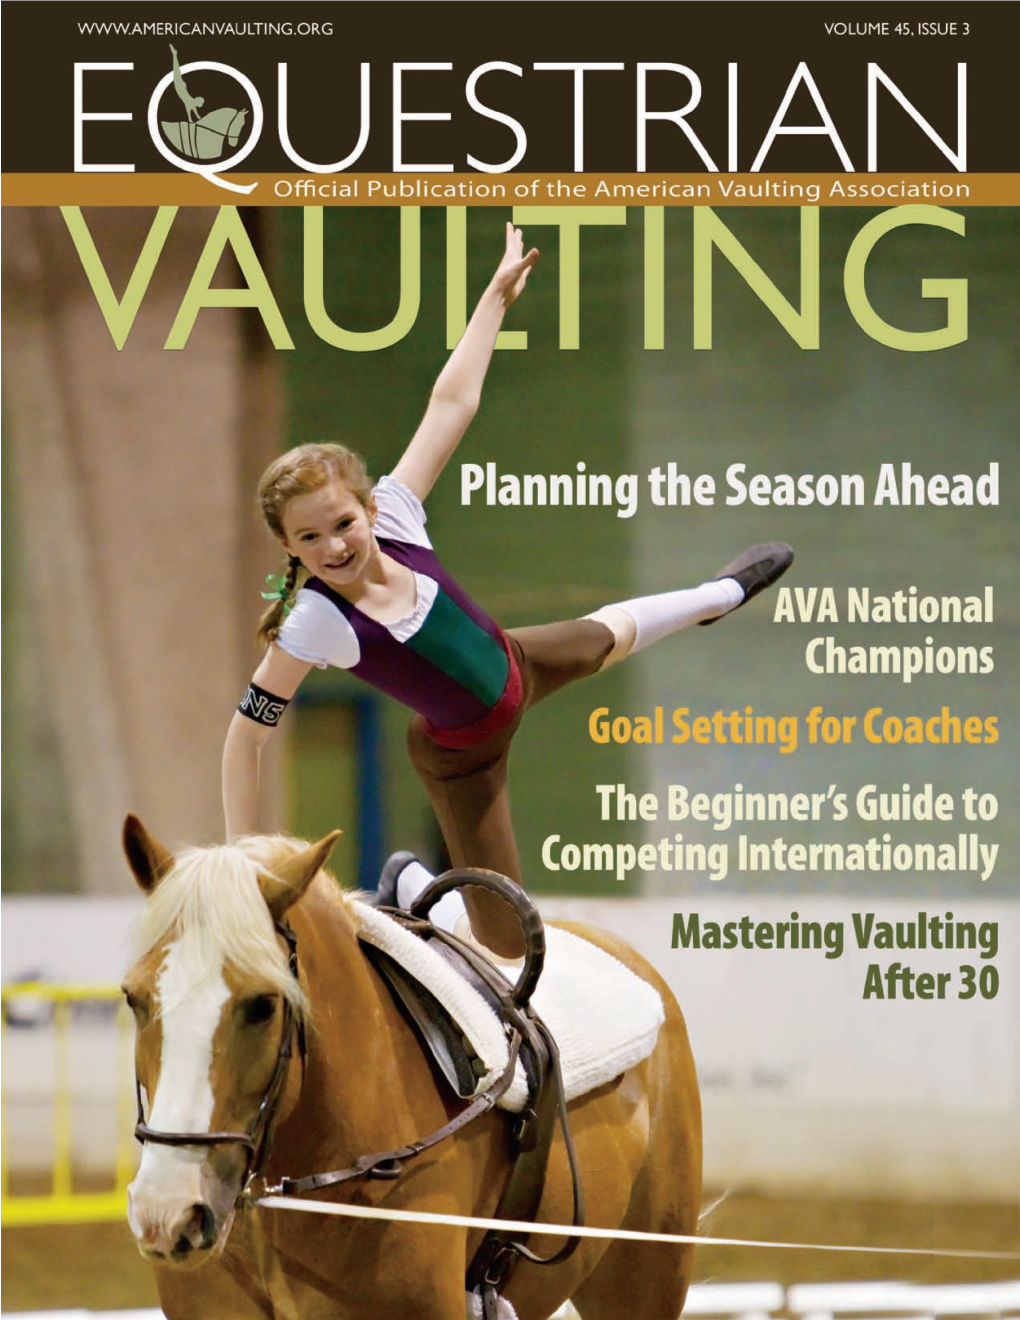 Equestrian Vaulting Magazine Is the Official Publication of the American Vaulting Association